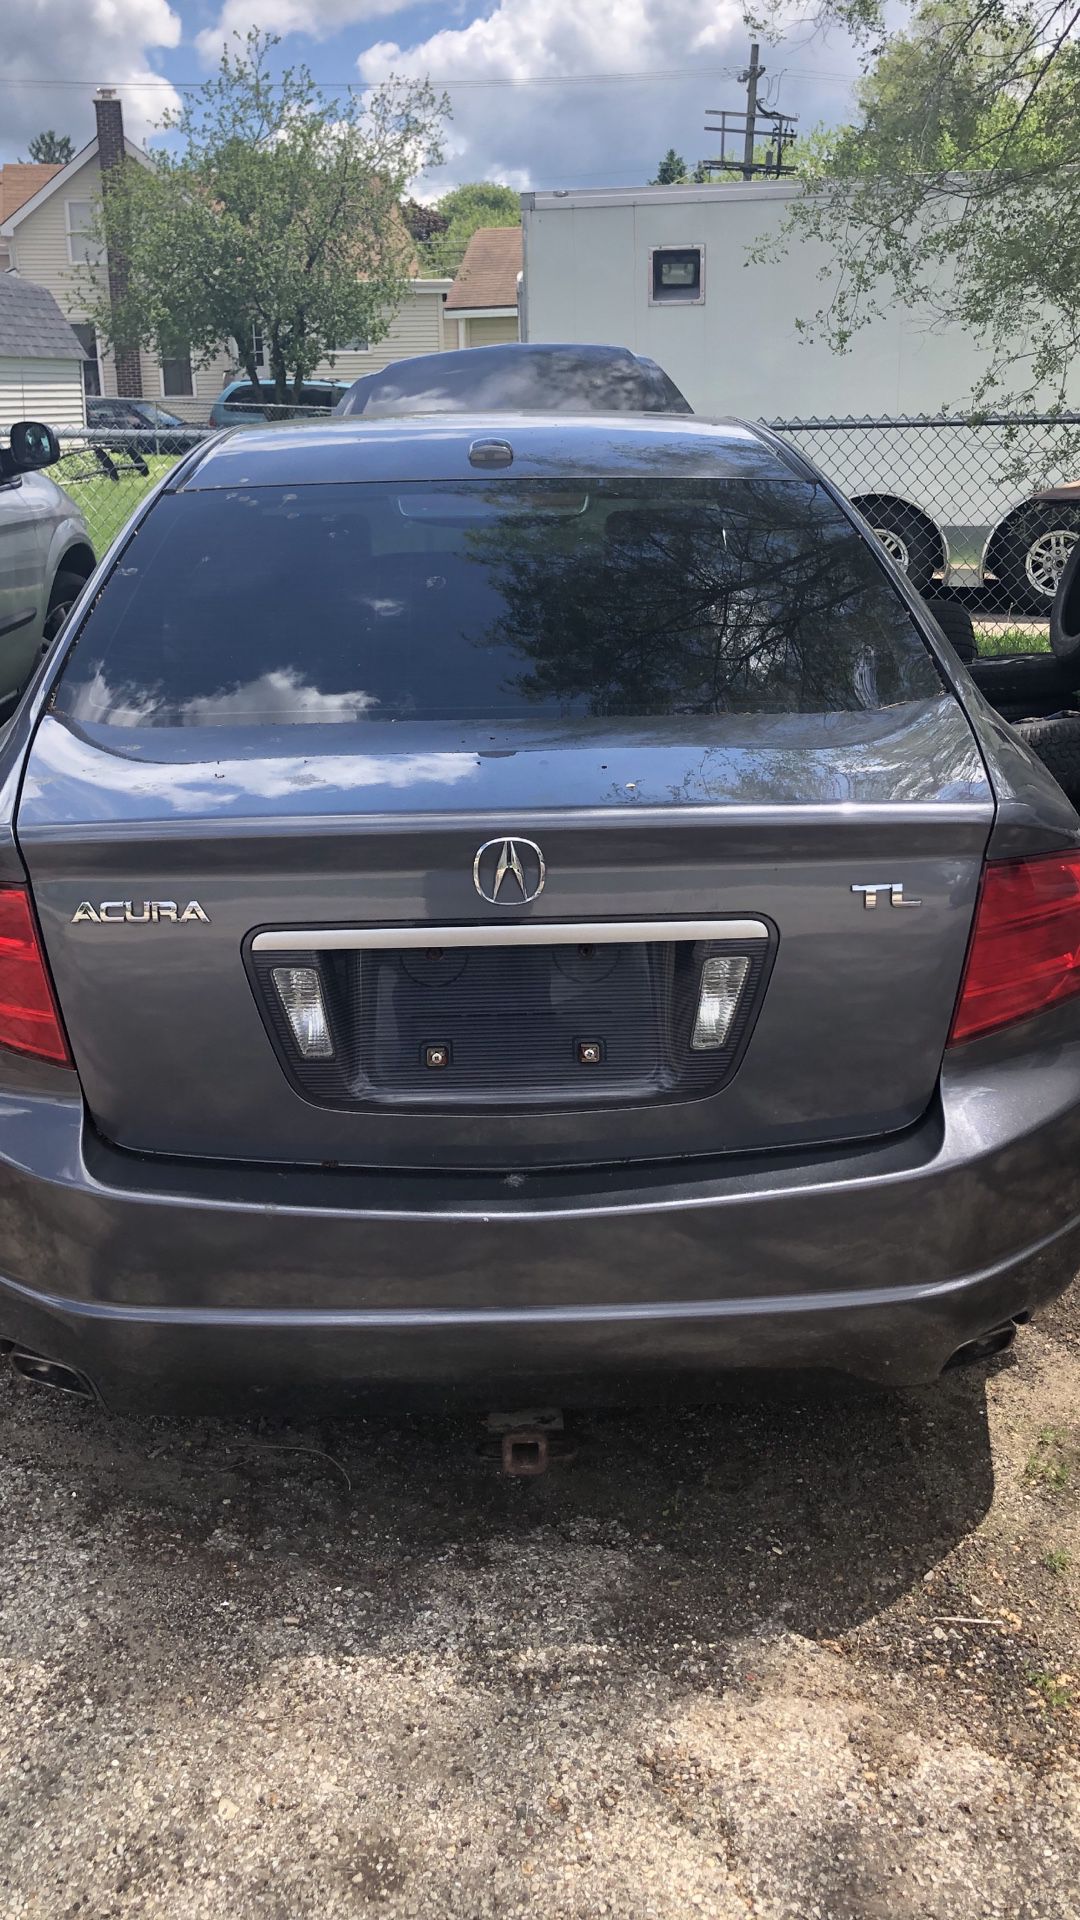 06 Acura TL for parts strong motor low miles 800 dls